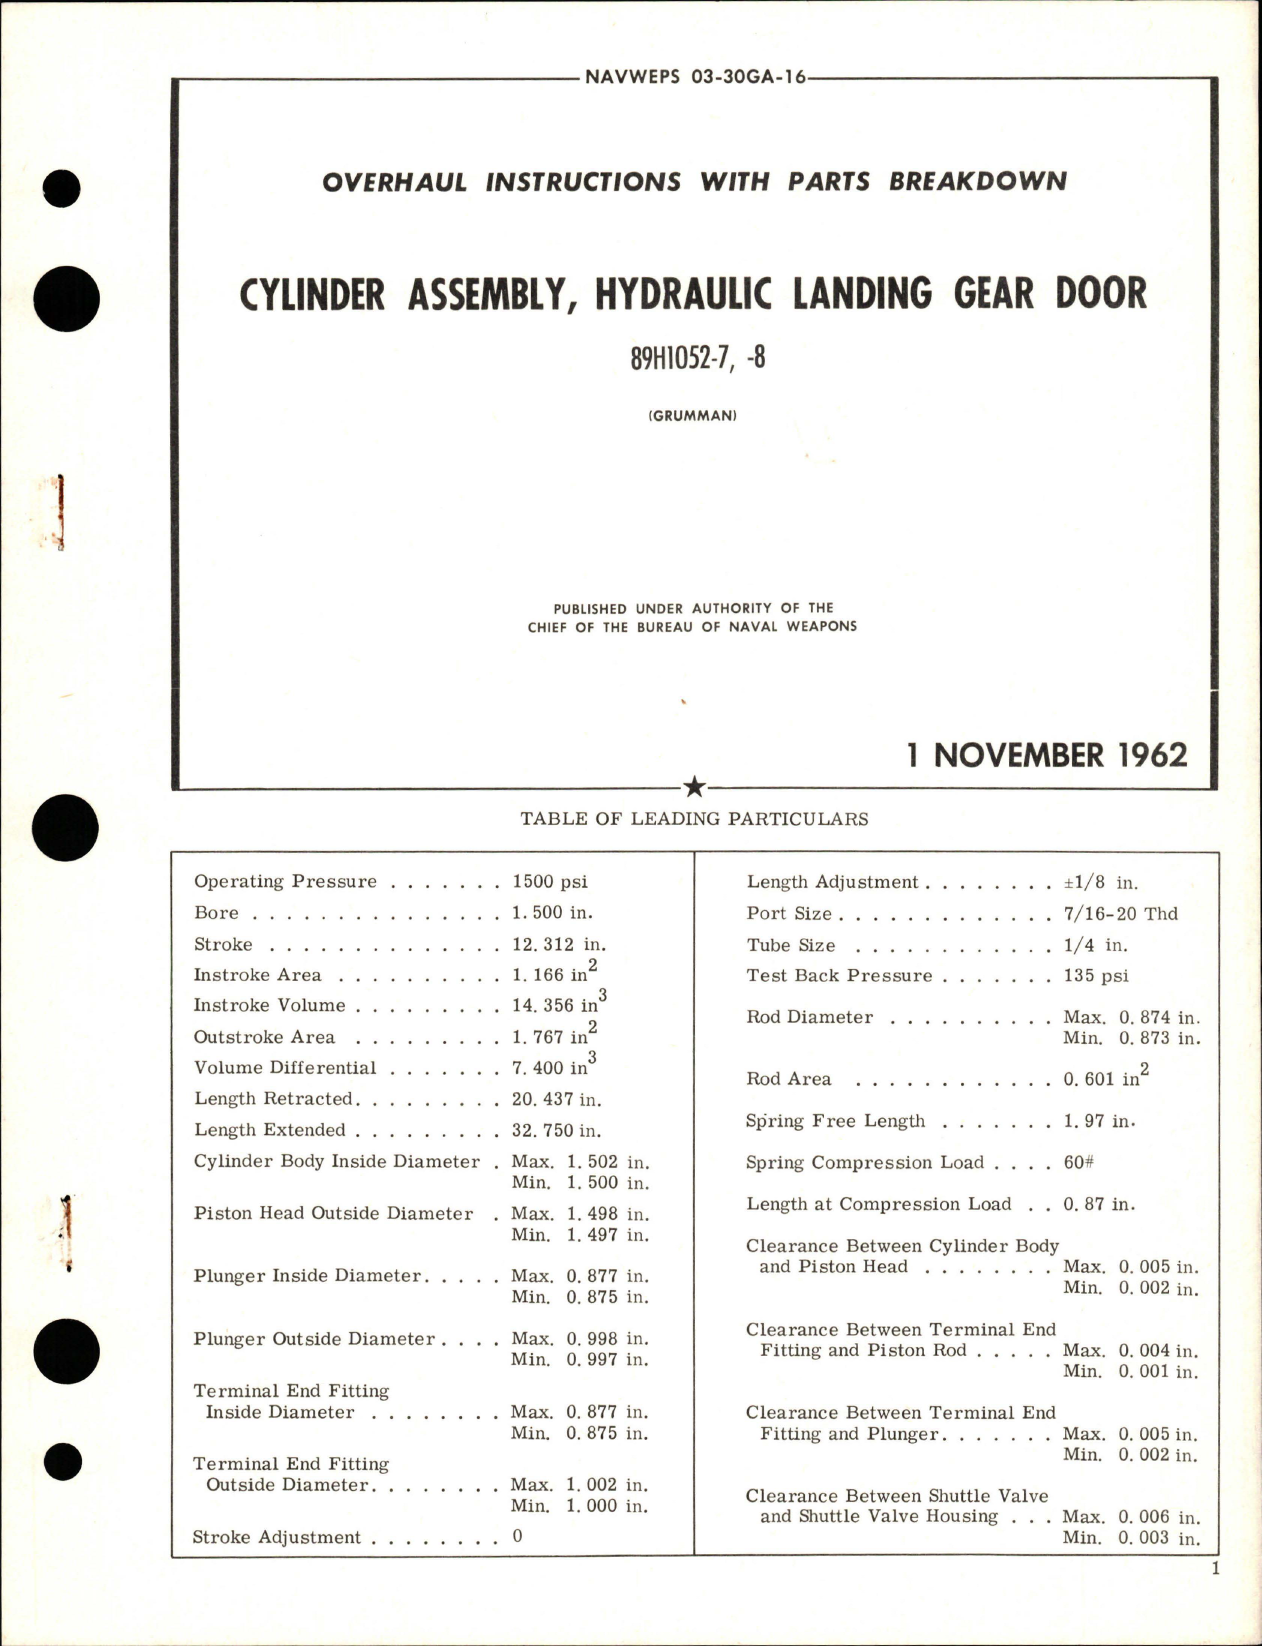 Sample page 1 from AirCorps Library document: Overhaul Instructions with Parts Breakdown for Hydraulic Gear Door Cylinder Assembly - 89H1052-7 and 89H1052-8